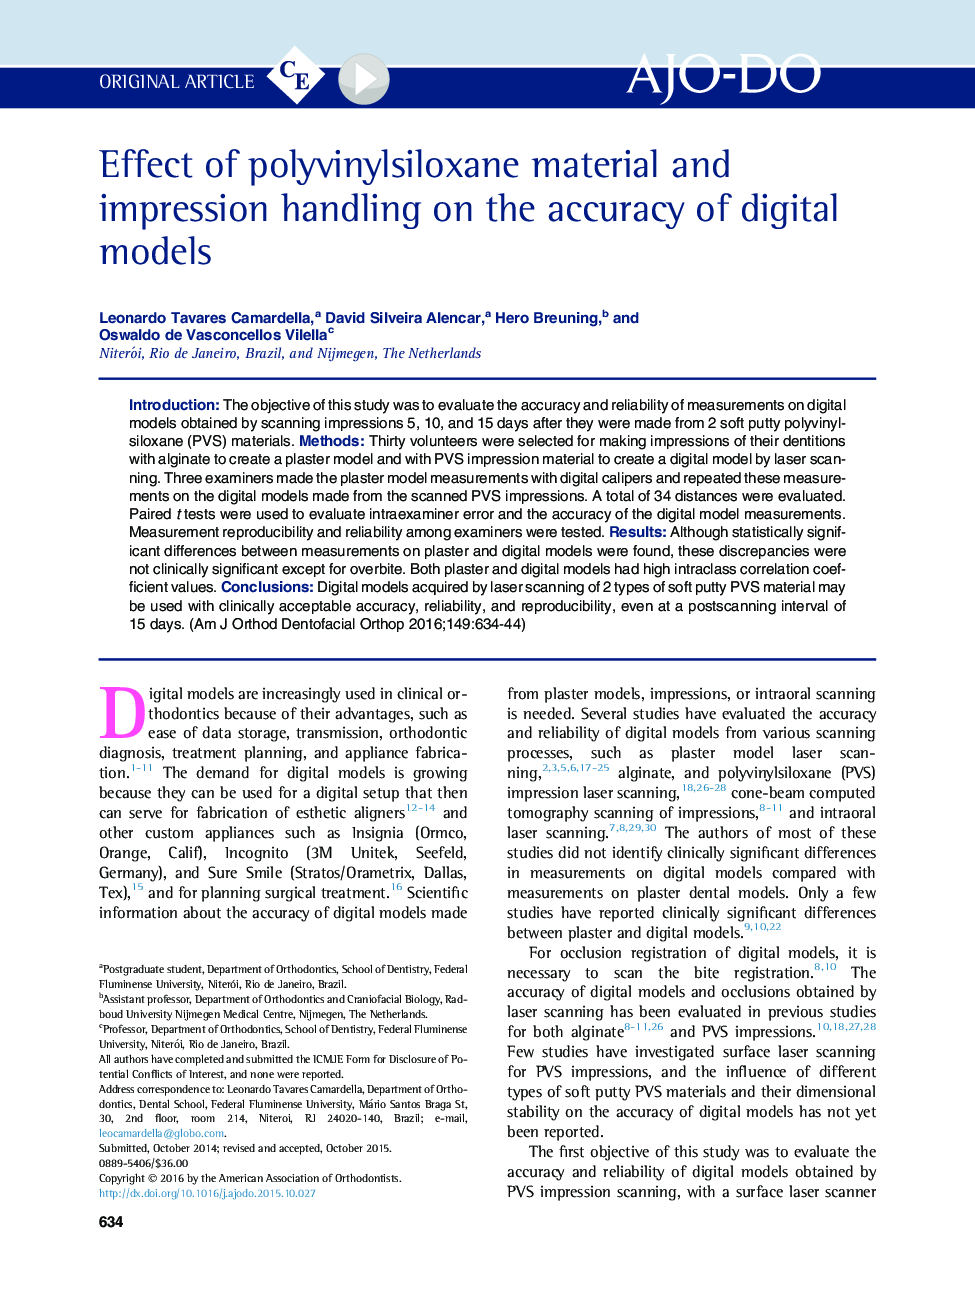 Effect of polyvinylsiloxane material and impression handling on the accuracy of digital models 